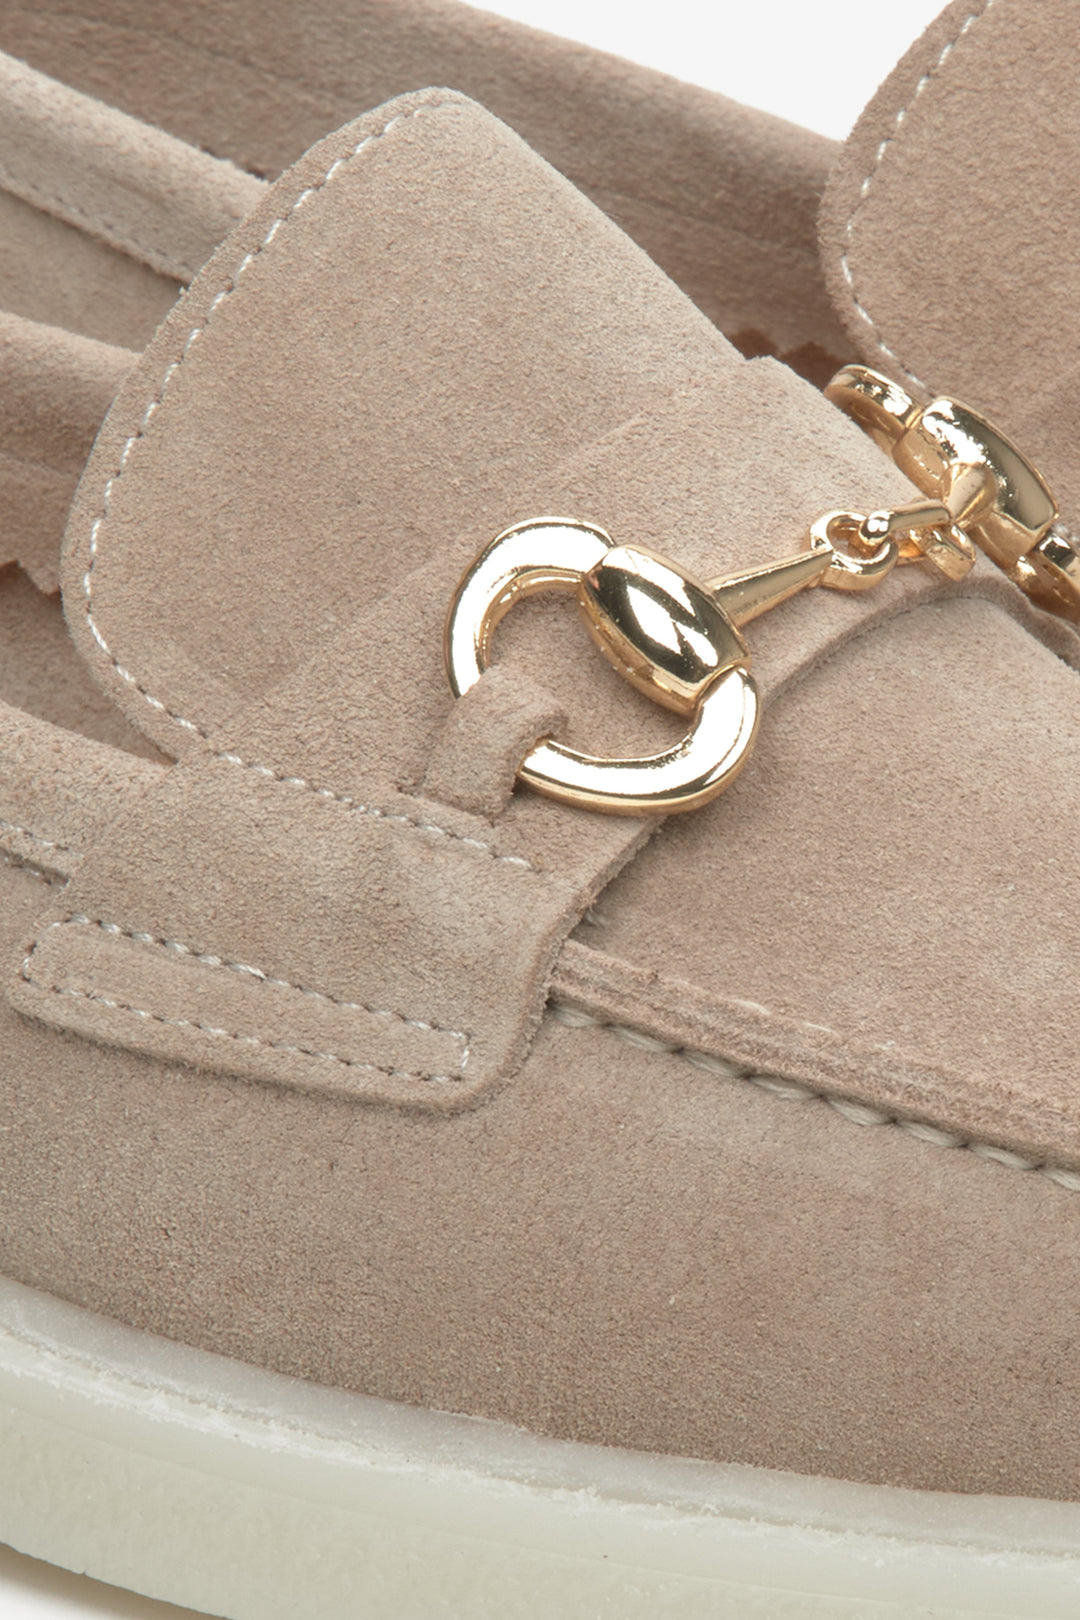 Estro beige women's loafers with gold buckle - close up on details.